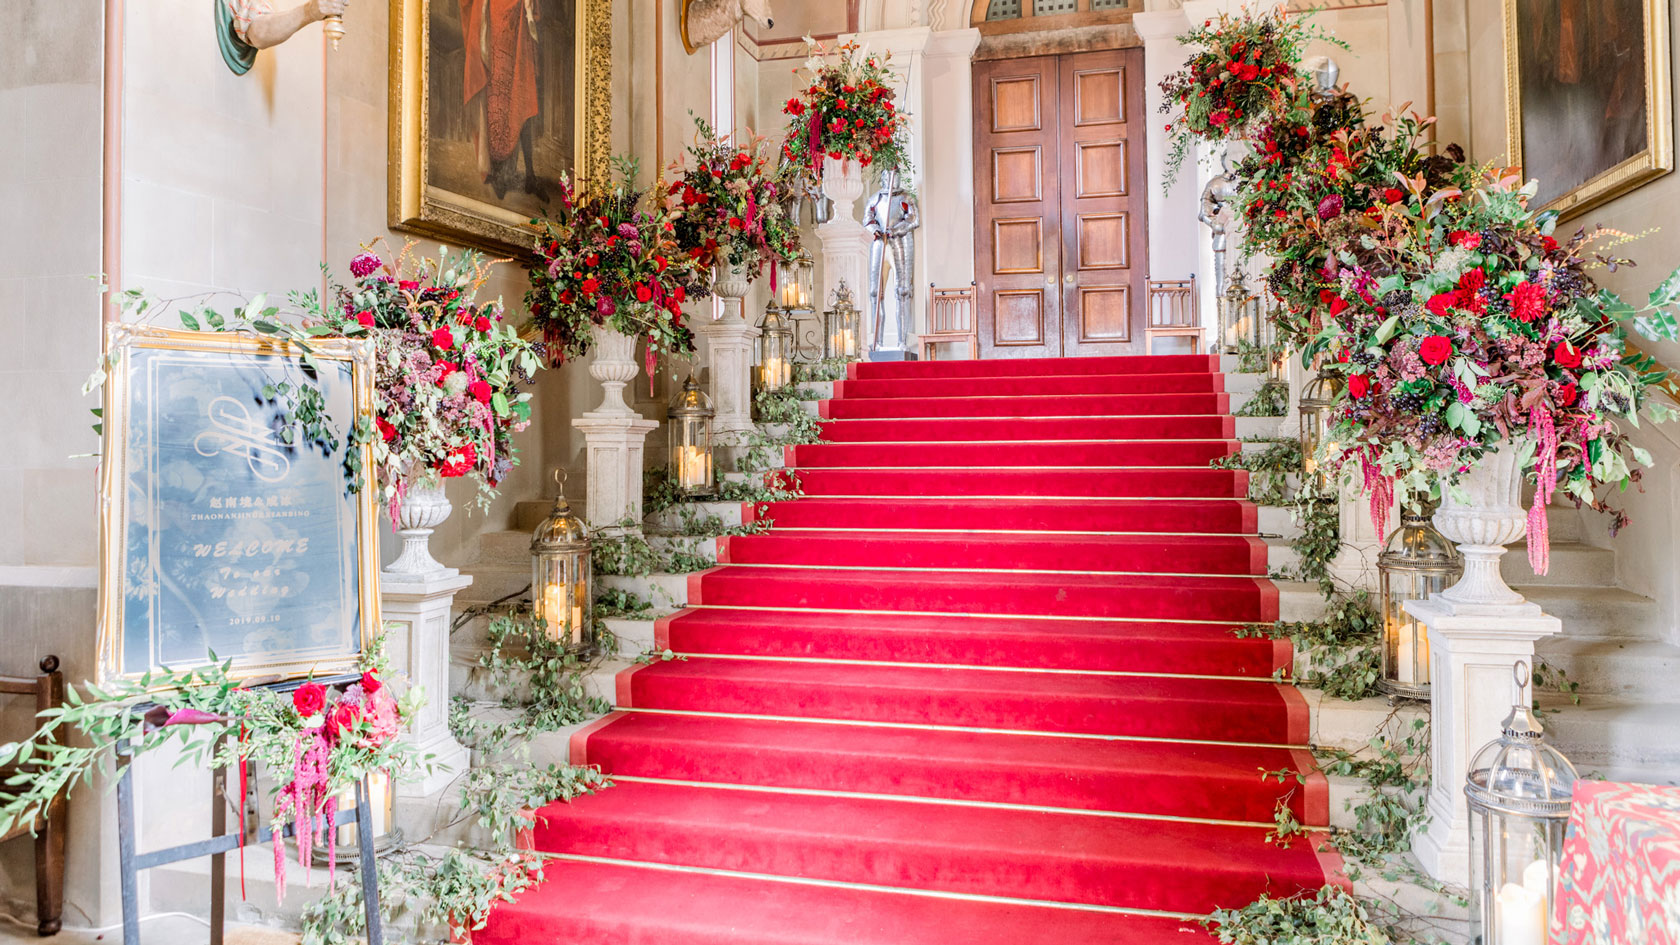 a castle staircase with an avenue or urns and plynths filled with flowers on each step